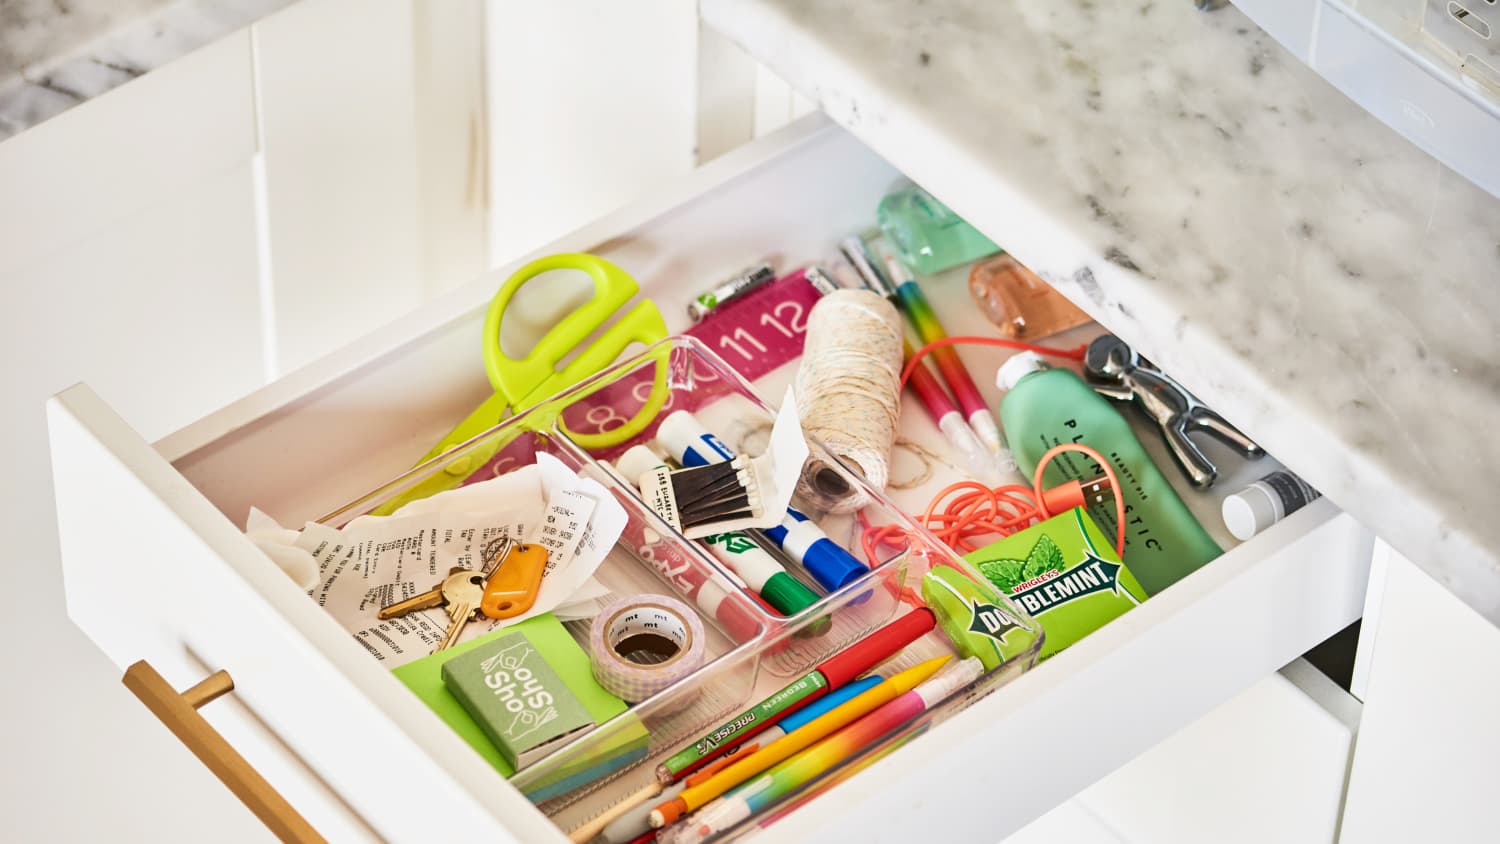 Organizing the kitchen drawers (even the junk drawer) – Green With